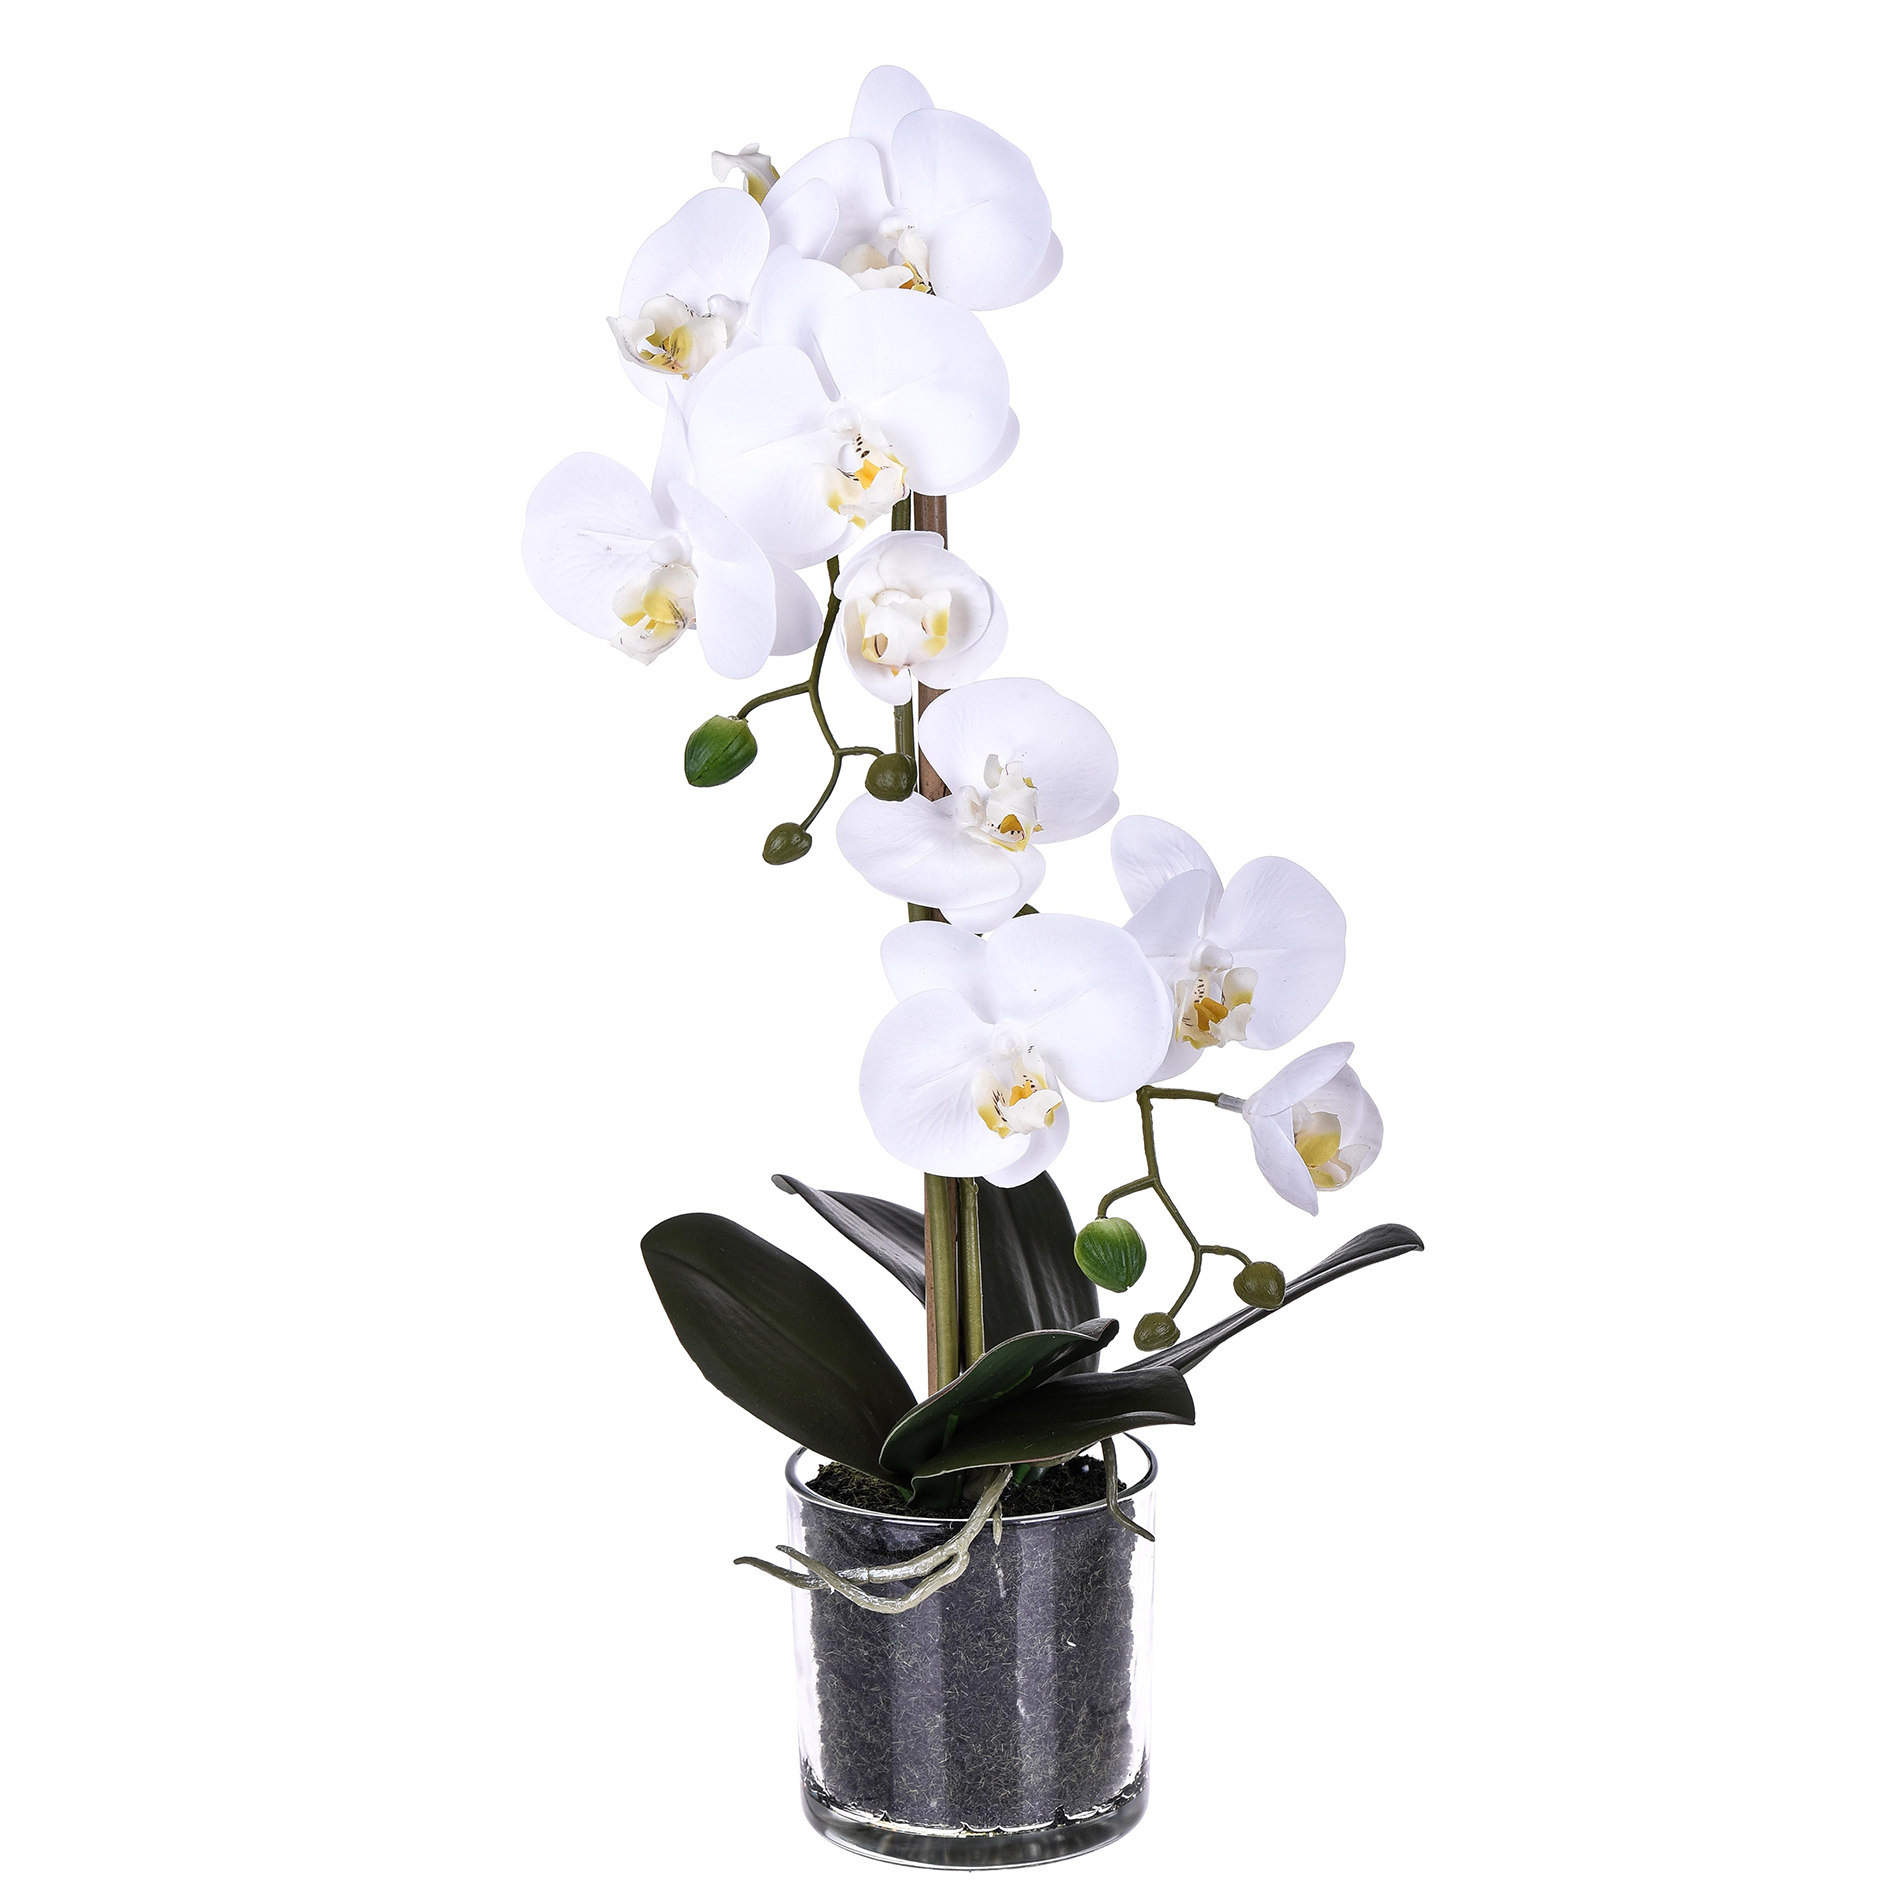 HALLOWEEN AND WITCHES,AUTUMN DECORATIONS,PHALAENOPSIS C/VASO 48 CM REAL TOUCH